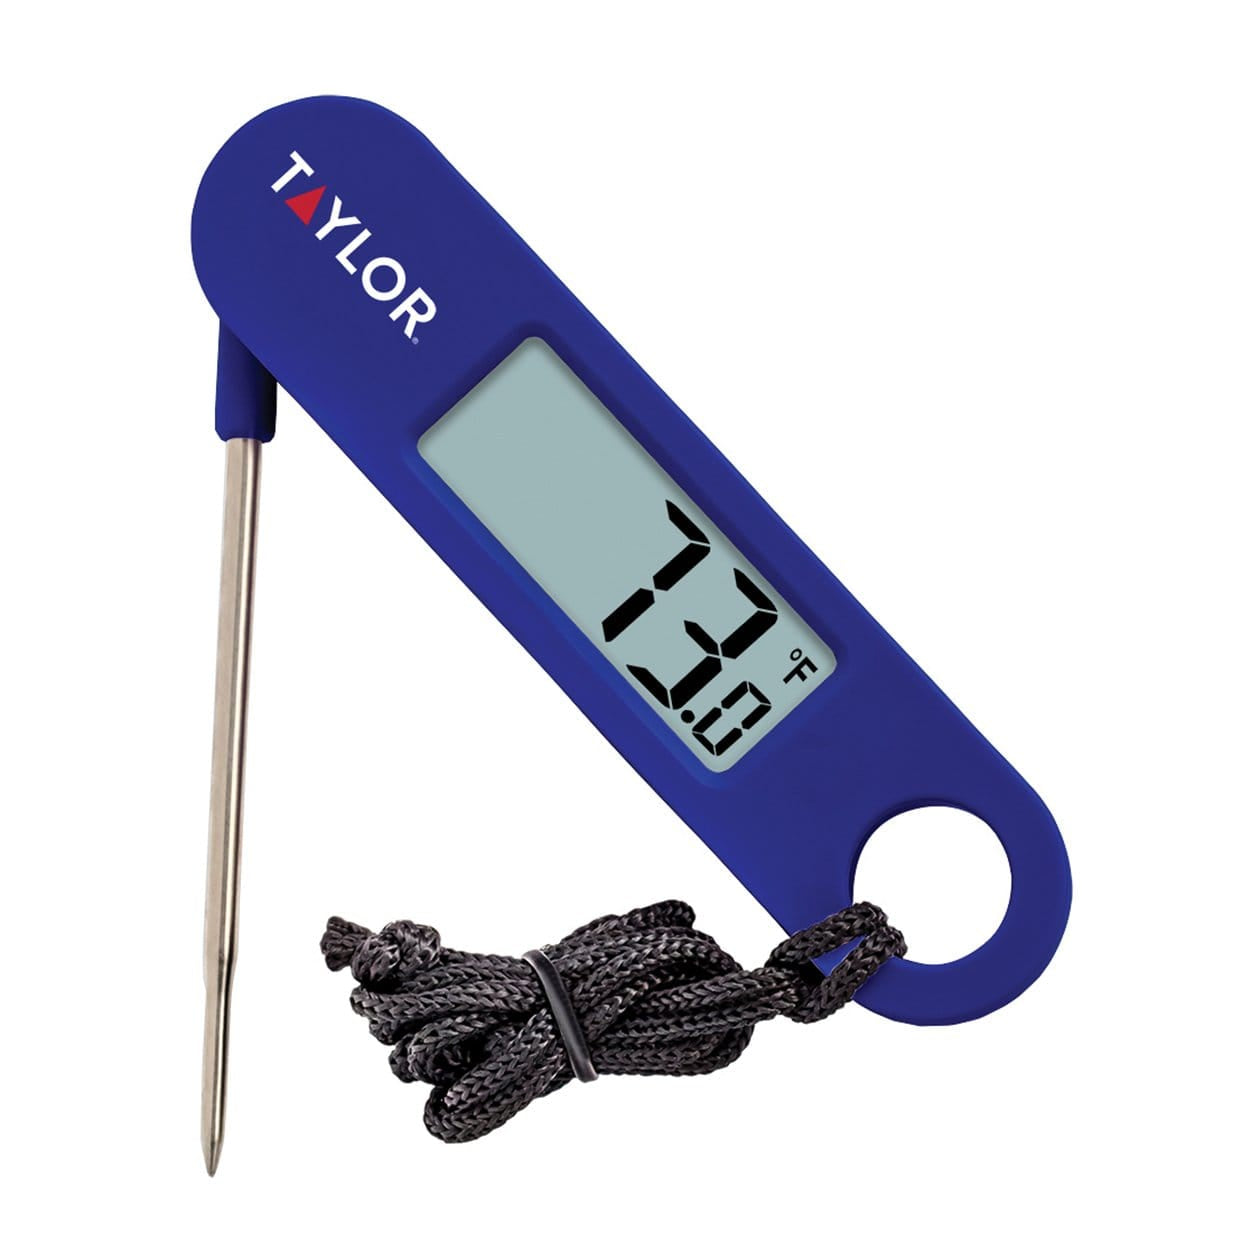 5.06 Width 0.75 Length 6.60' Height 5.06' Width 0.75' Length Taylor Precision Products 1476FDA Compact Folding Probe Digital Thermometer with Magnet and Lanyard 6.60 Height